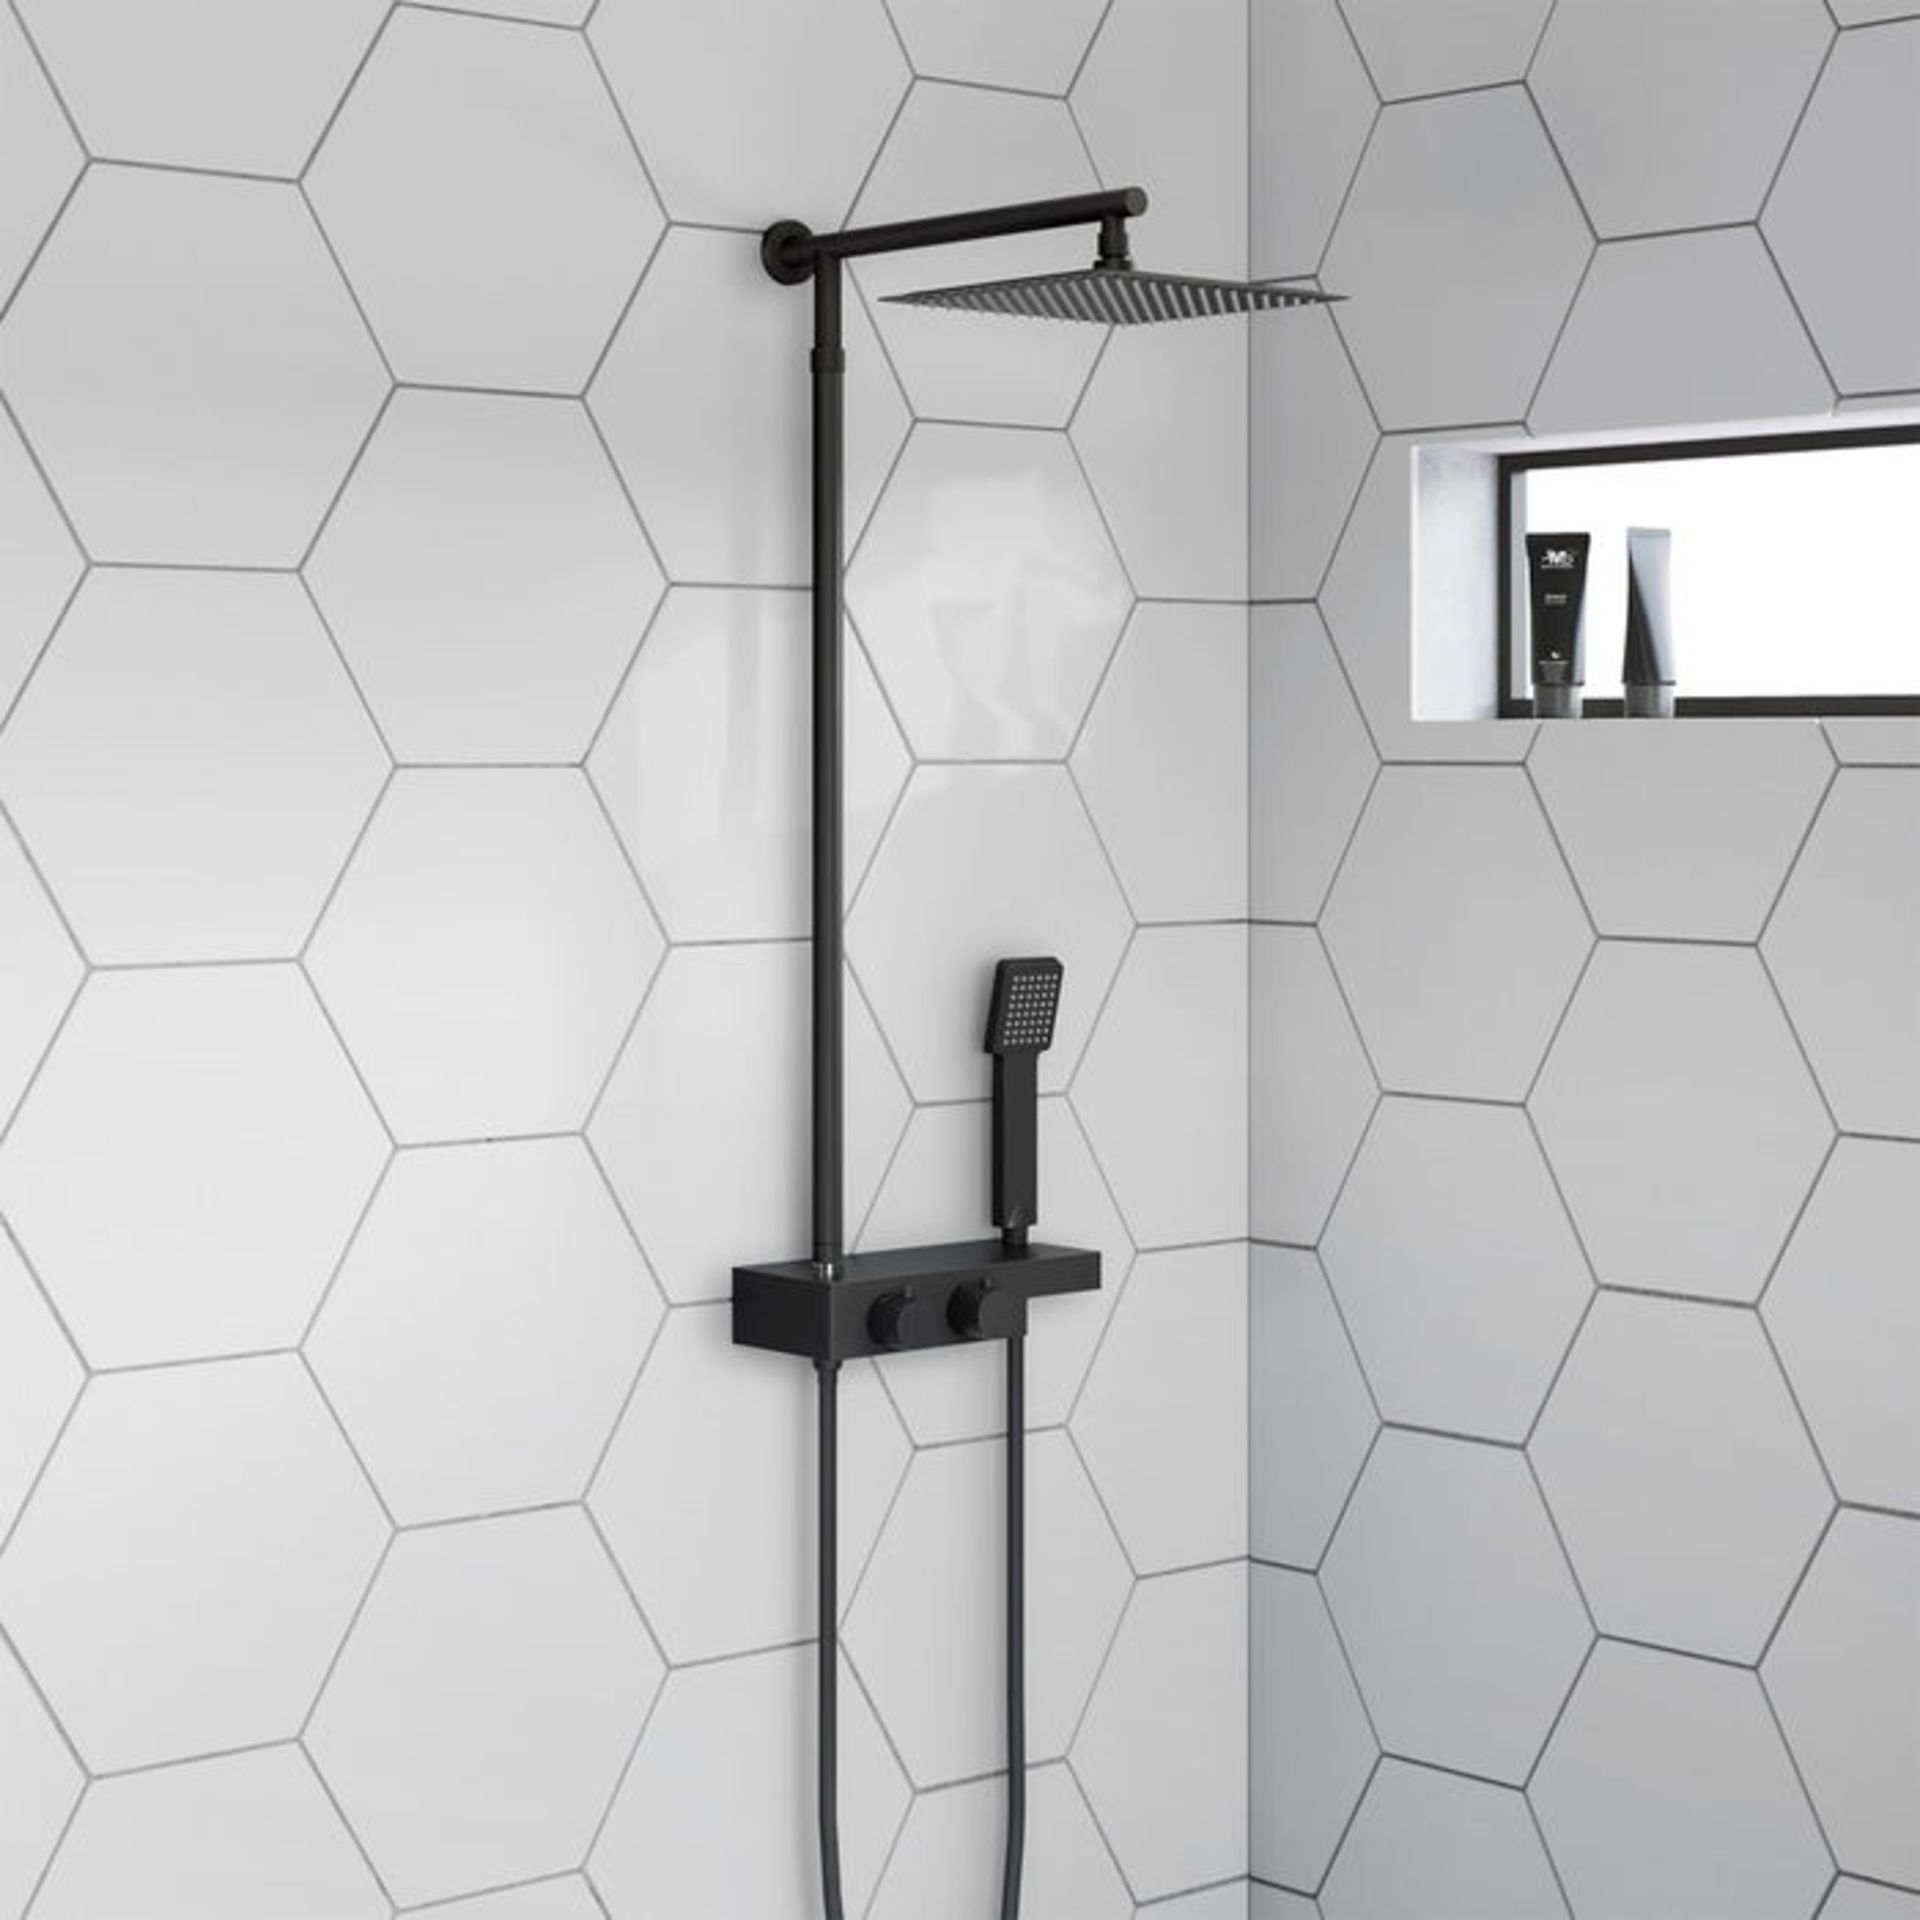 NEW & BOXDED Matte Black Square Thermostatic Mixer Shower Kit & Shelf. RRP £599.99.SP5102BLK ... - Image 2 of 2